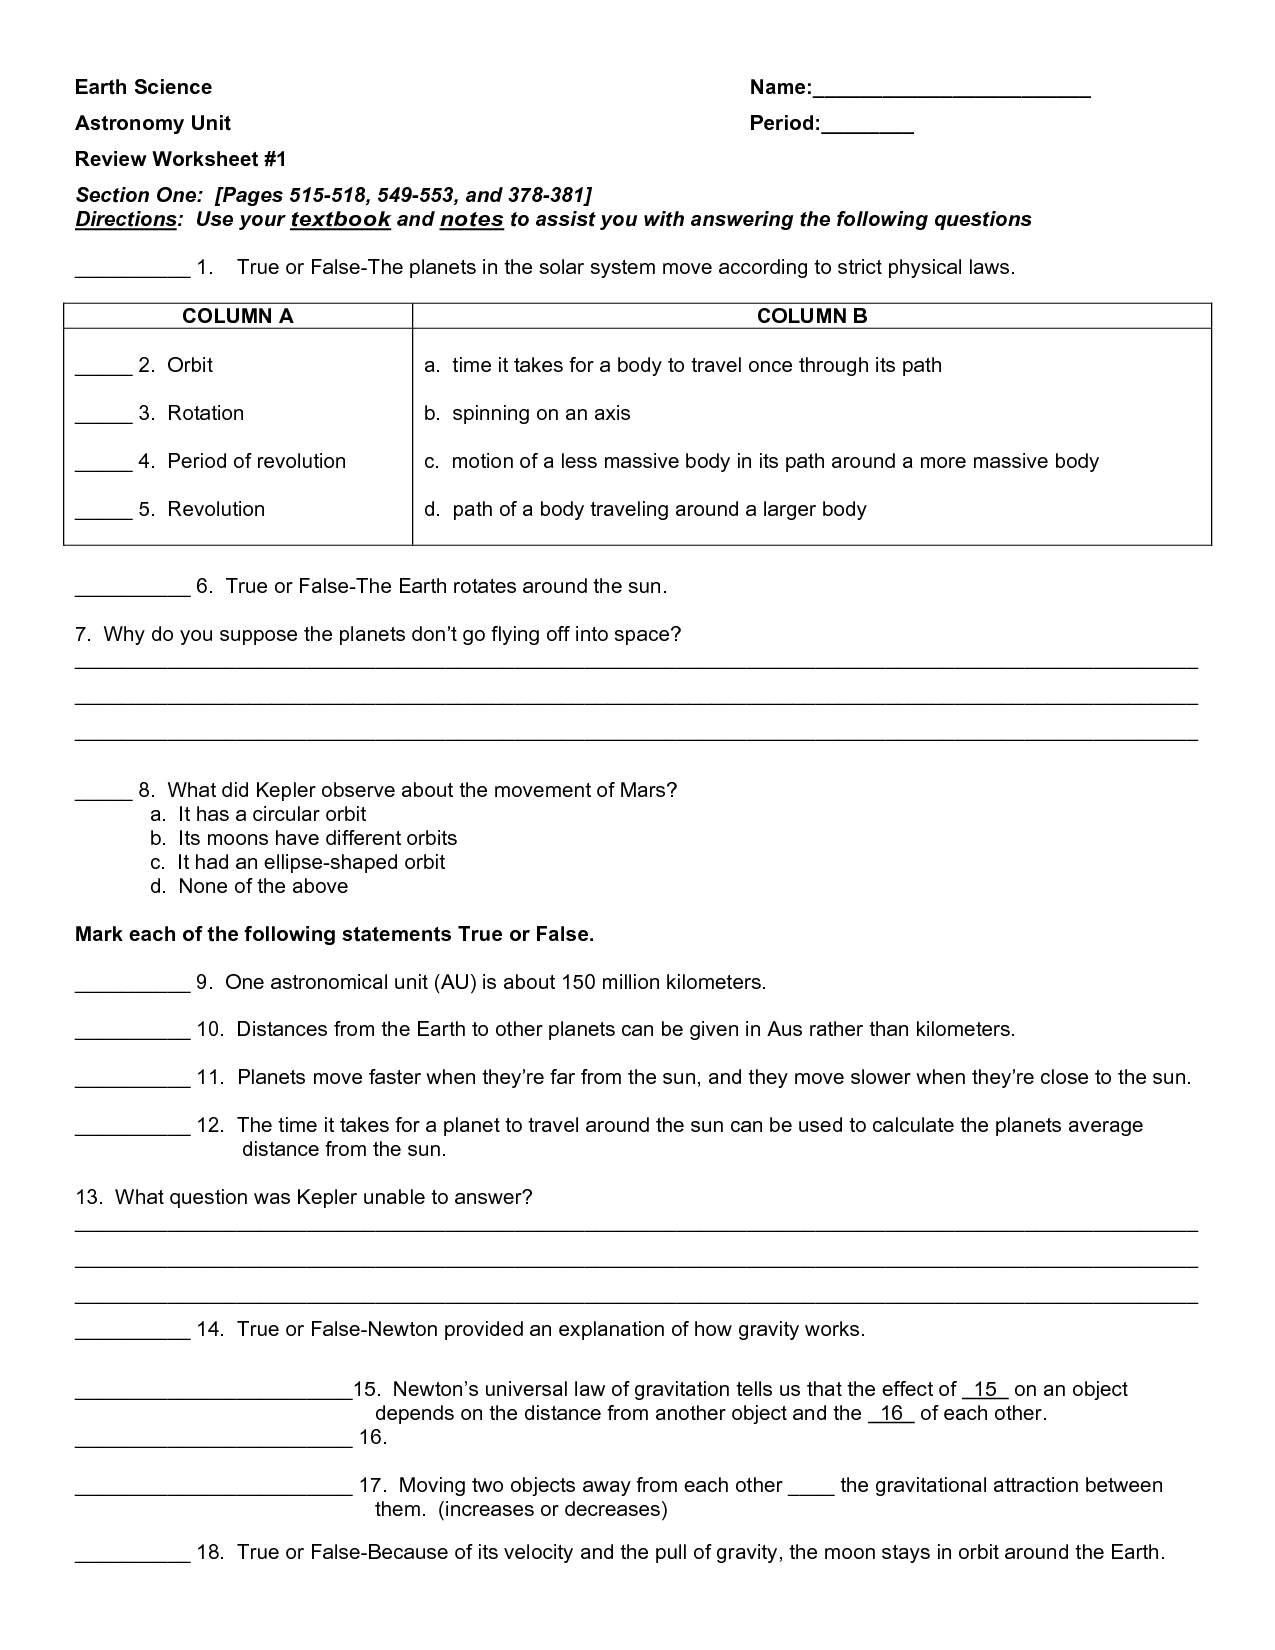 15-best-images-of-glencoe-earth-science-worksheets-earth-science